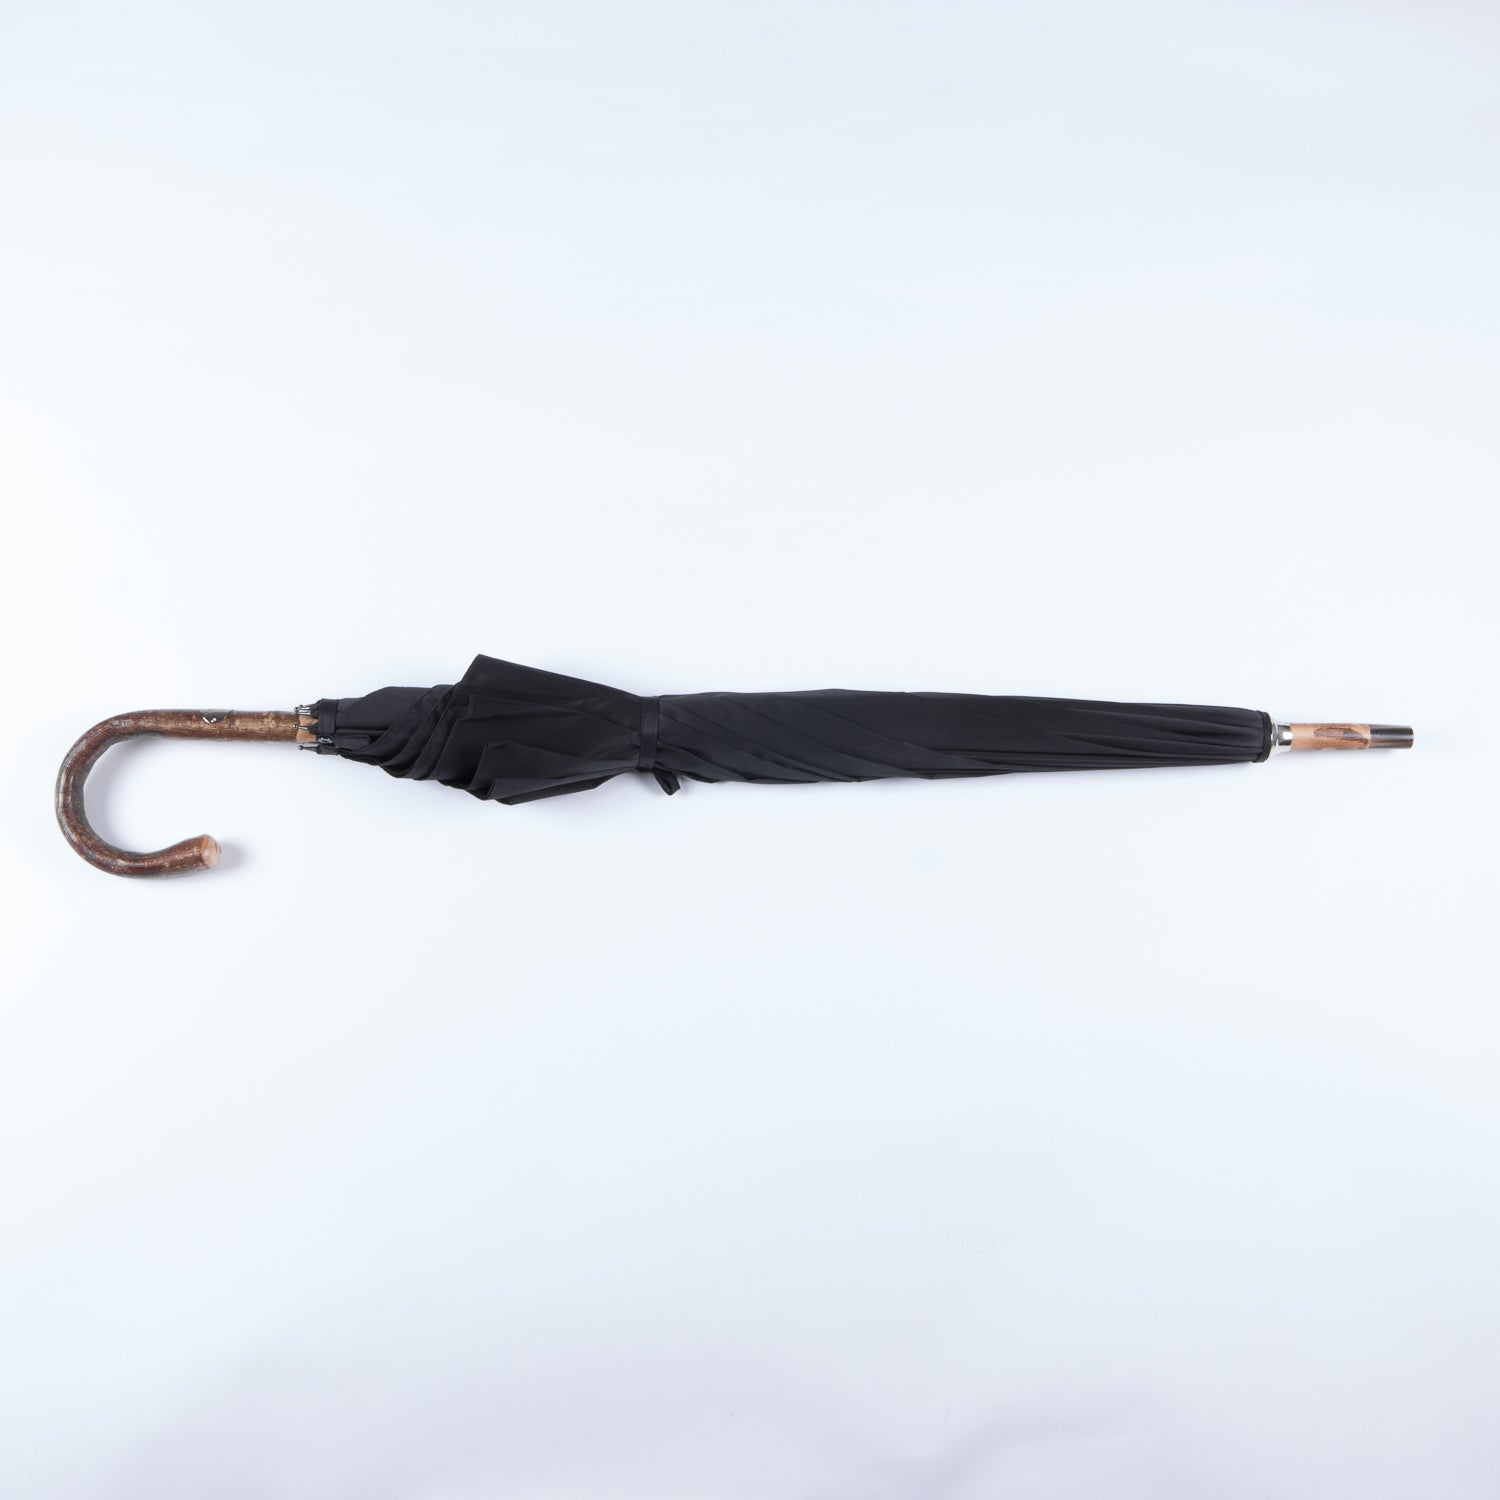 A Walnut Solid-Stick Umbrella with Black Canopy by KirbyAllison.com on a white background.